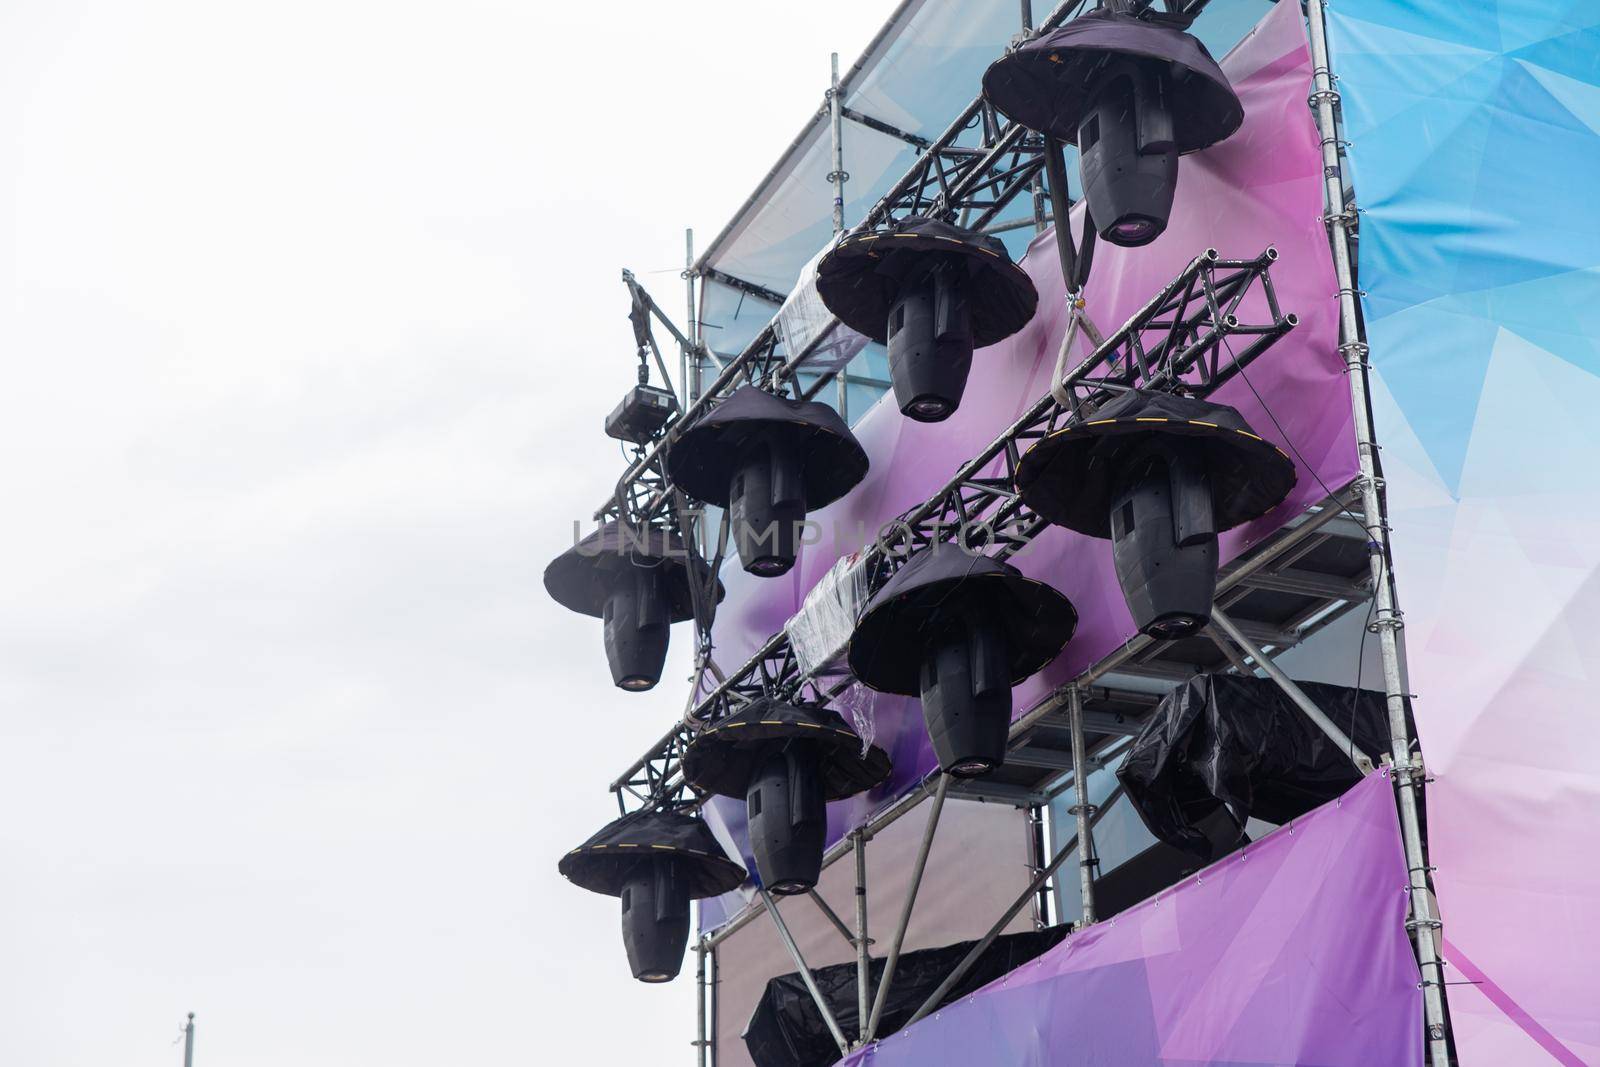 Professional lighting equipment high above an outdoor concert scene. by BY-_-BY